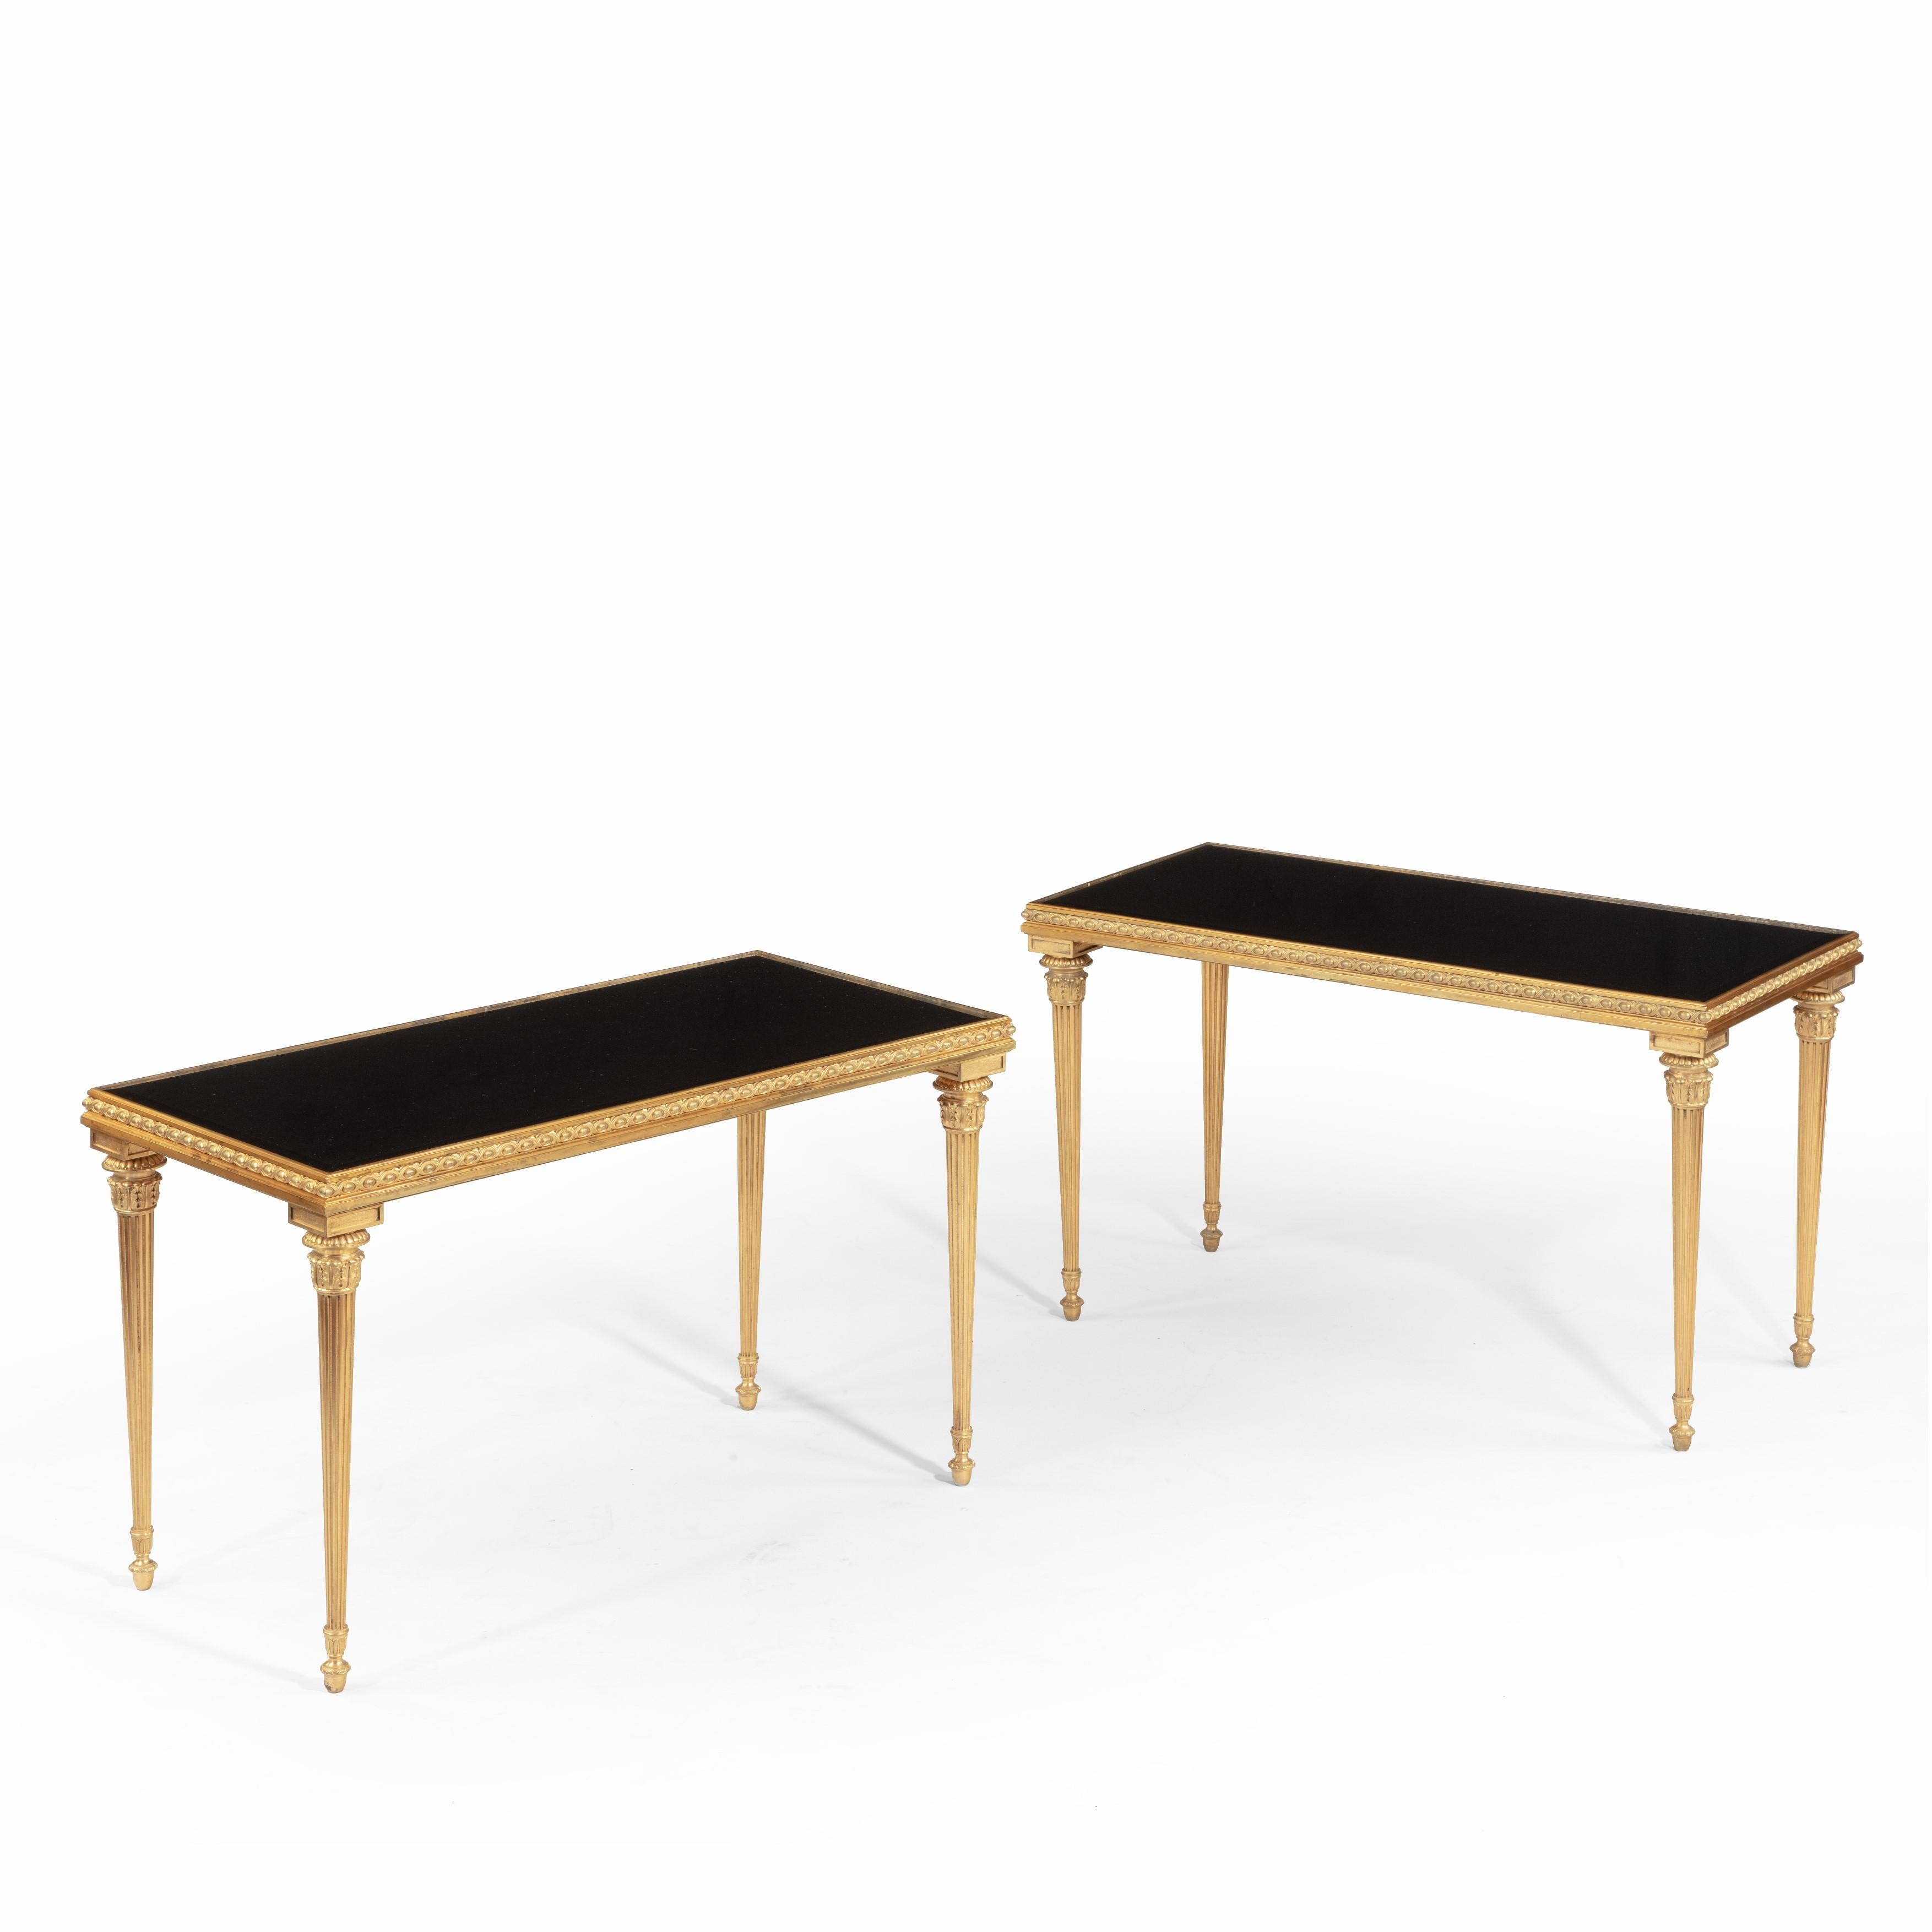 A fine pair of French ormolu low side tables, of rectangular form with bead and ribbon borders above tapering legs in the form of classical flambeaux, with later black glass tops, circa 1920.
 